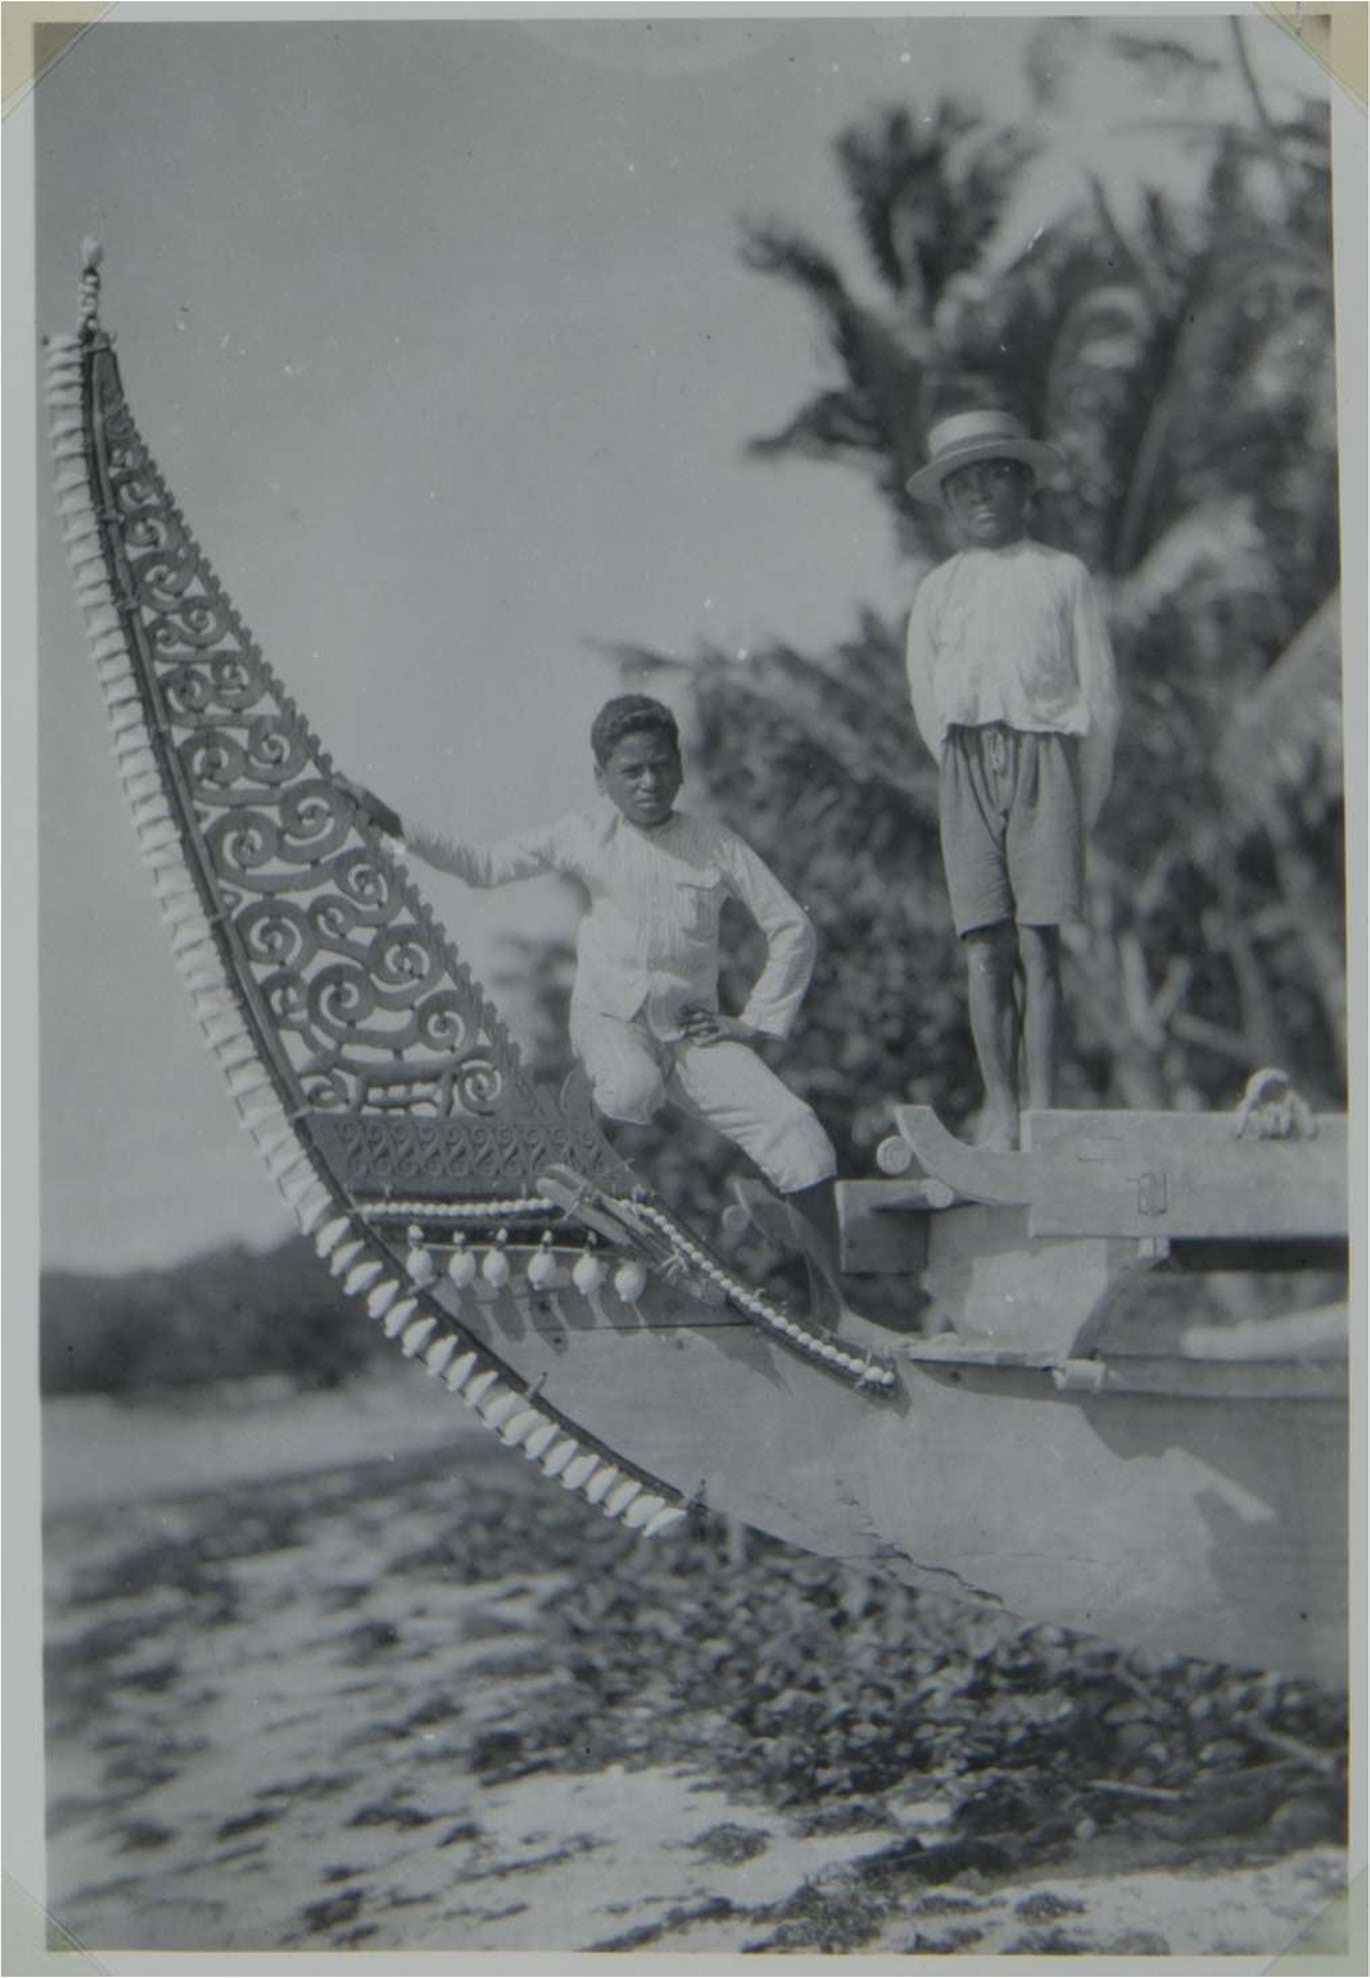 A black and white photo of two young boys on a ship with a decorative laced wood panel on it